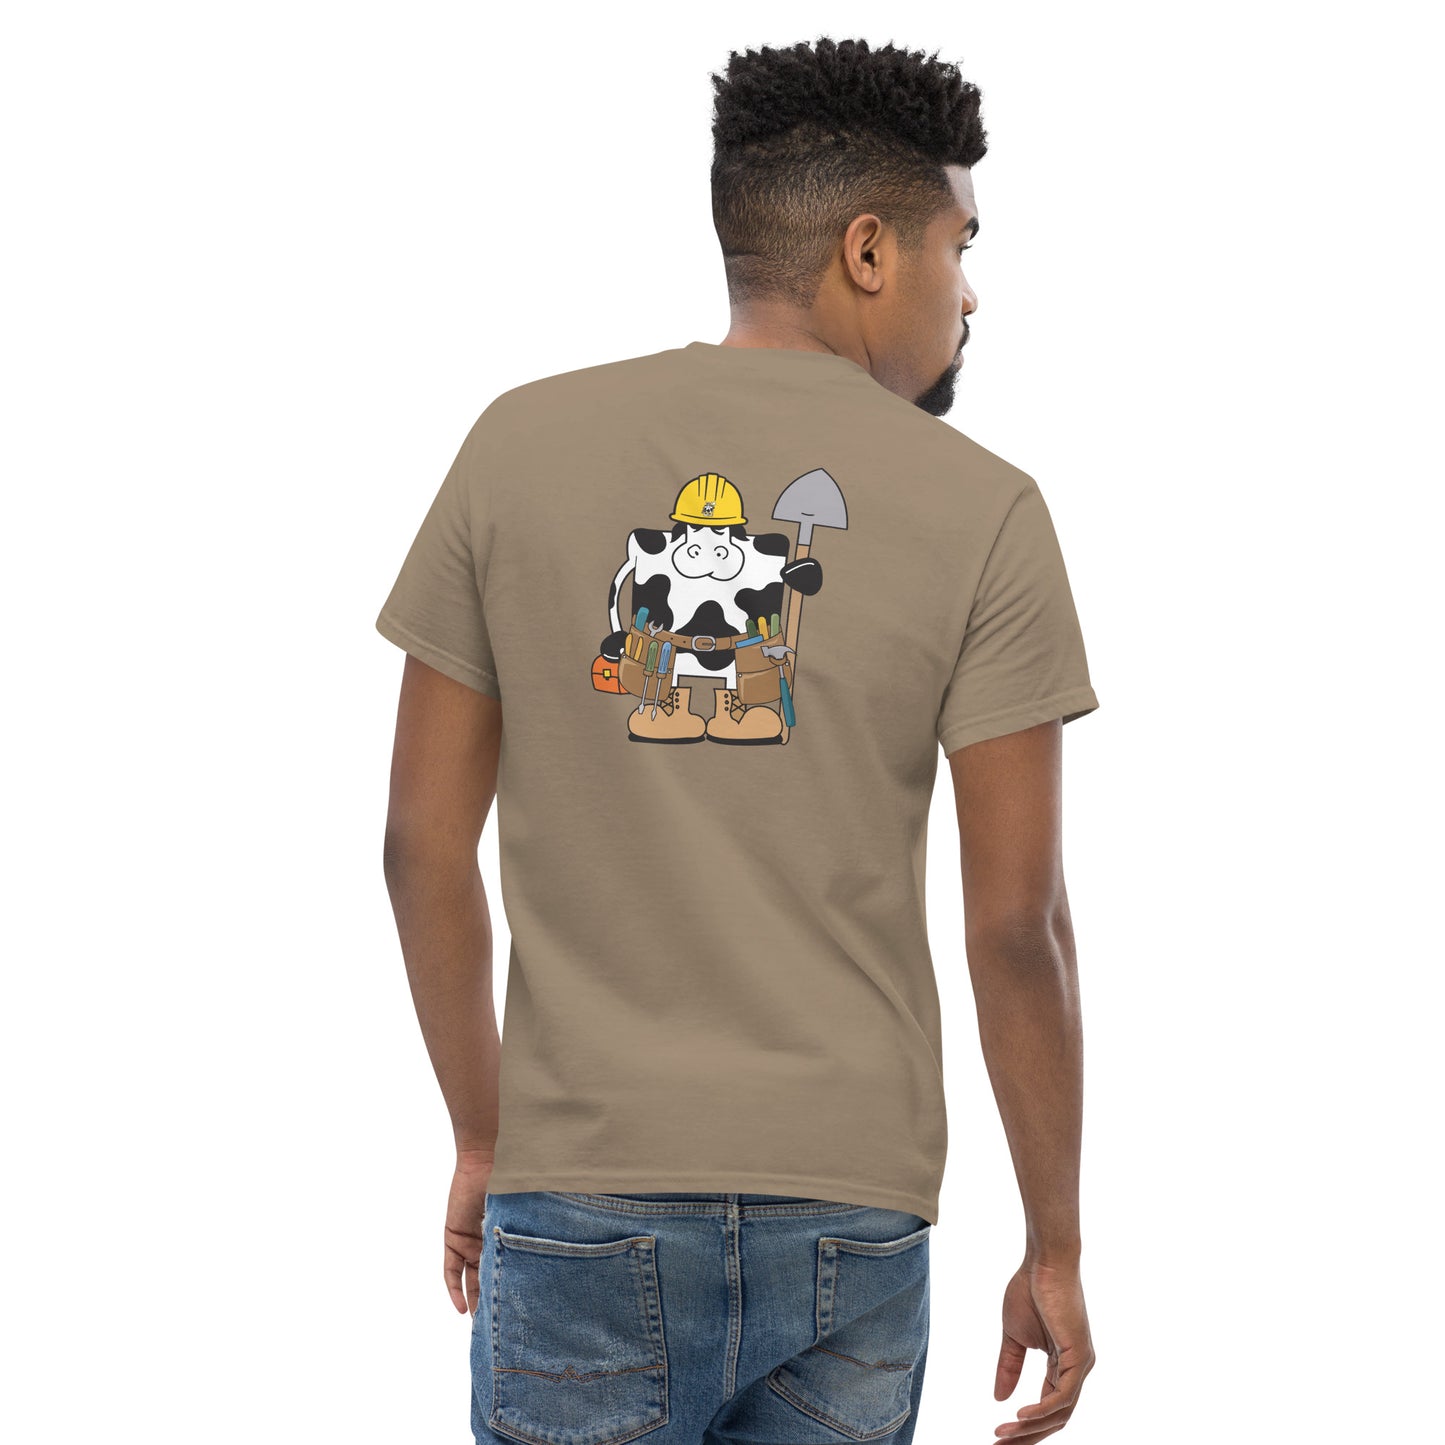 Construction Cow Adult Tee